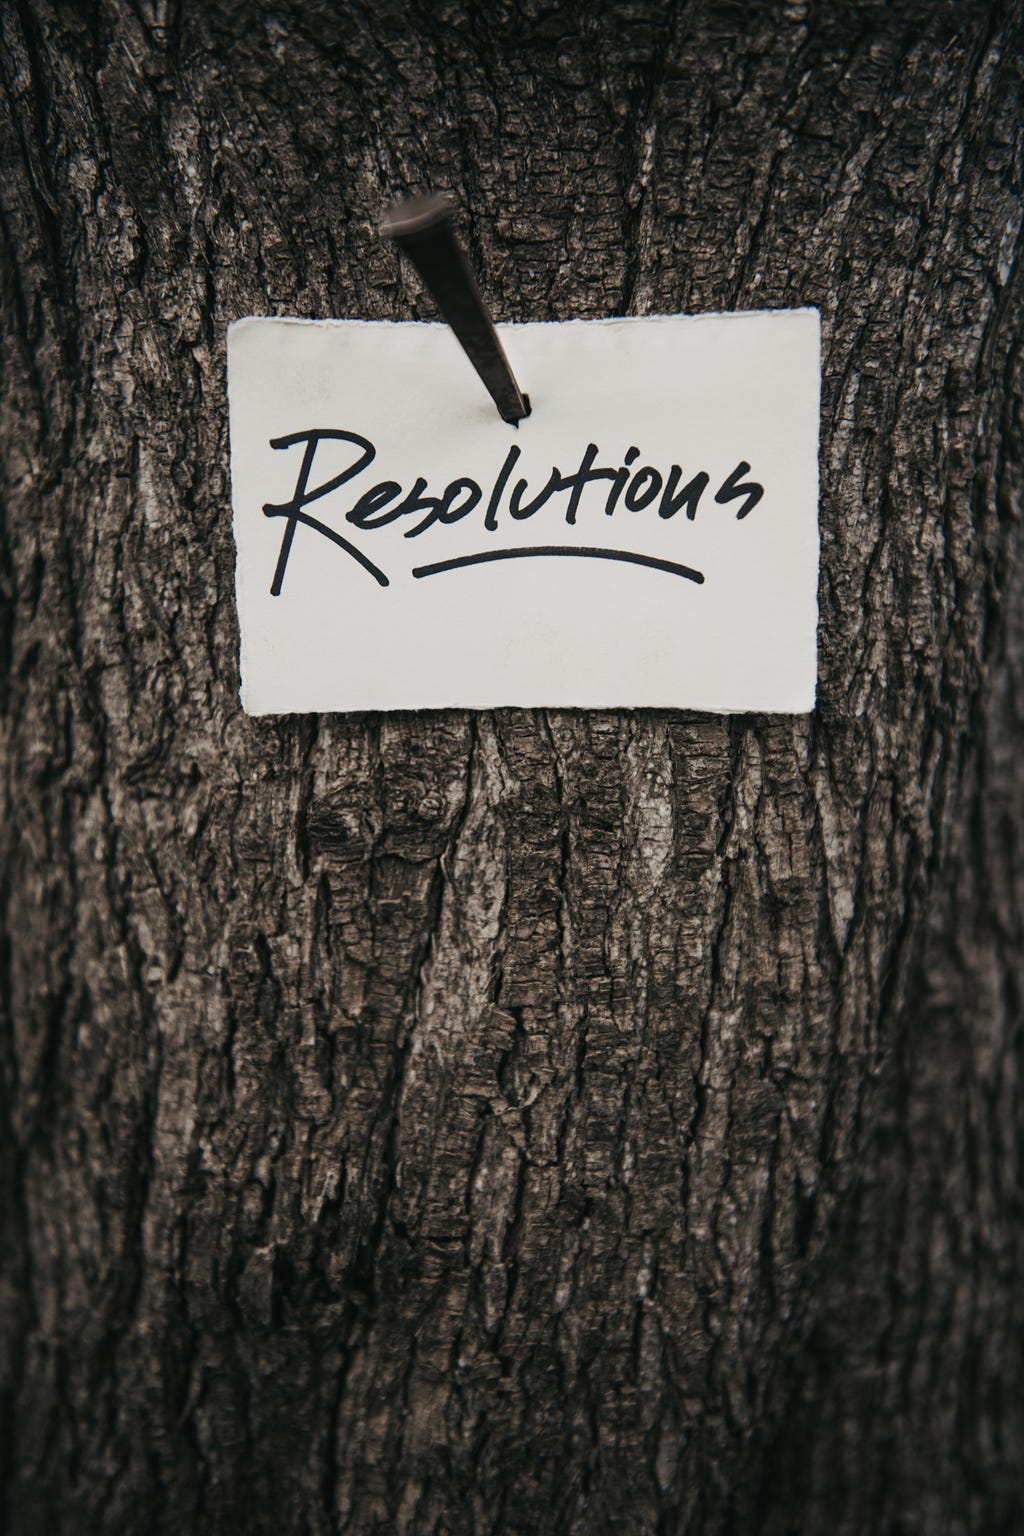 A sign reading “resolutions” is nailed to a tree.